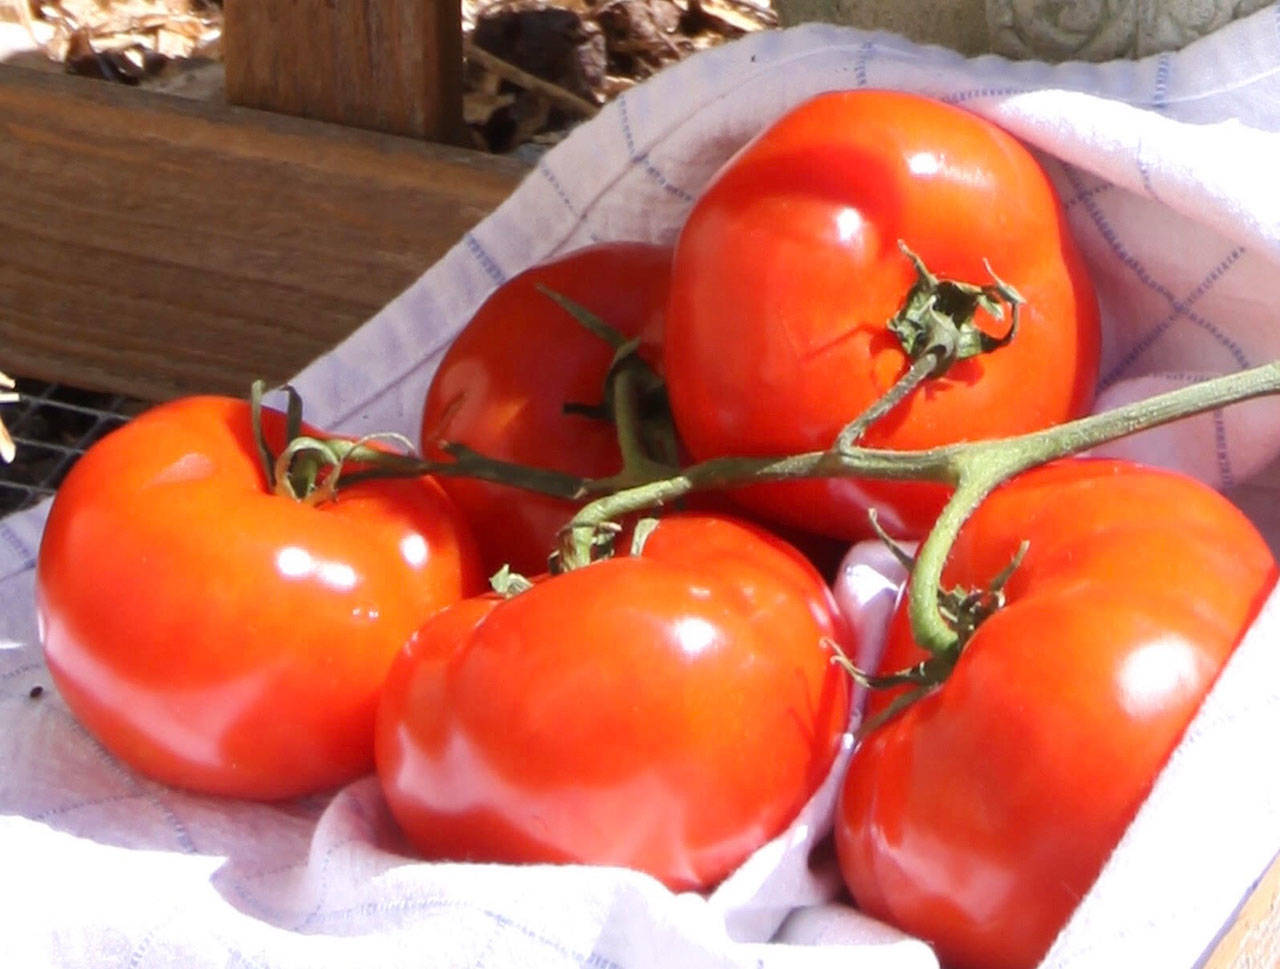 Poor conditions, pests and disease can each thwart a good crop of tomatoes. Photo by Sandy Cortez